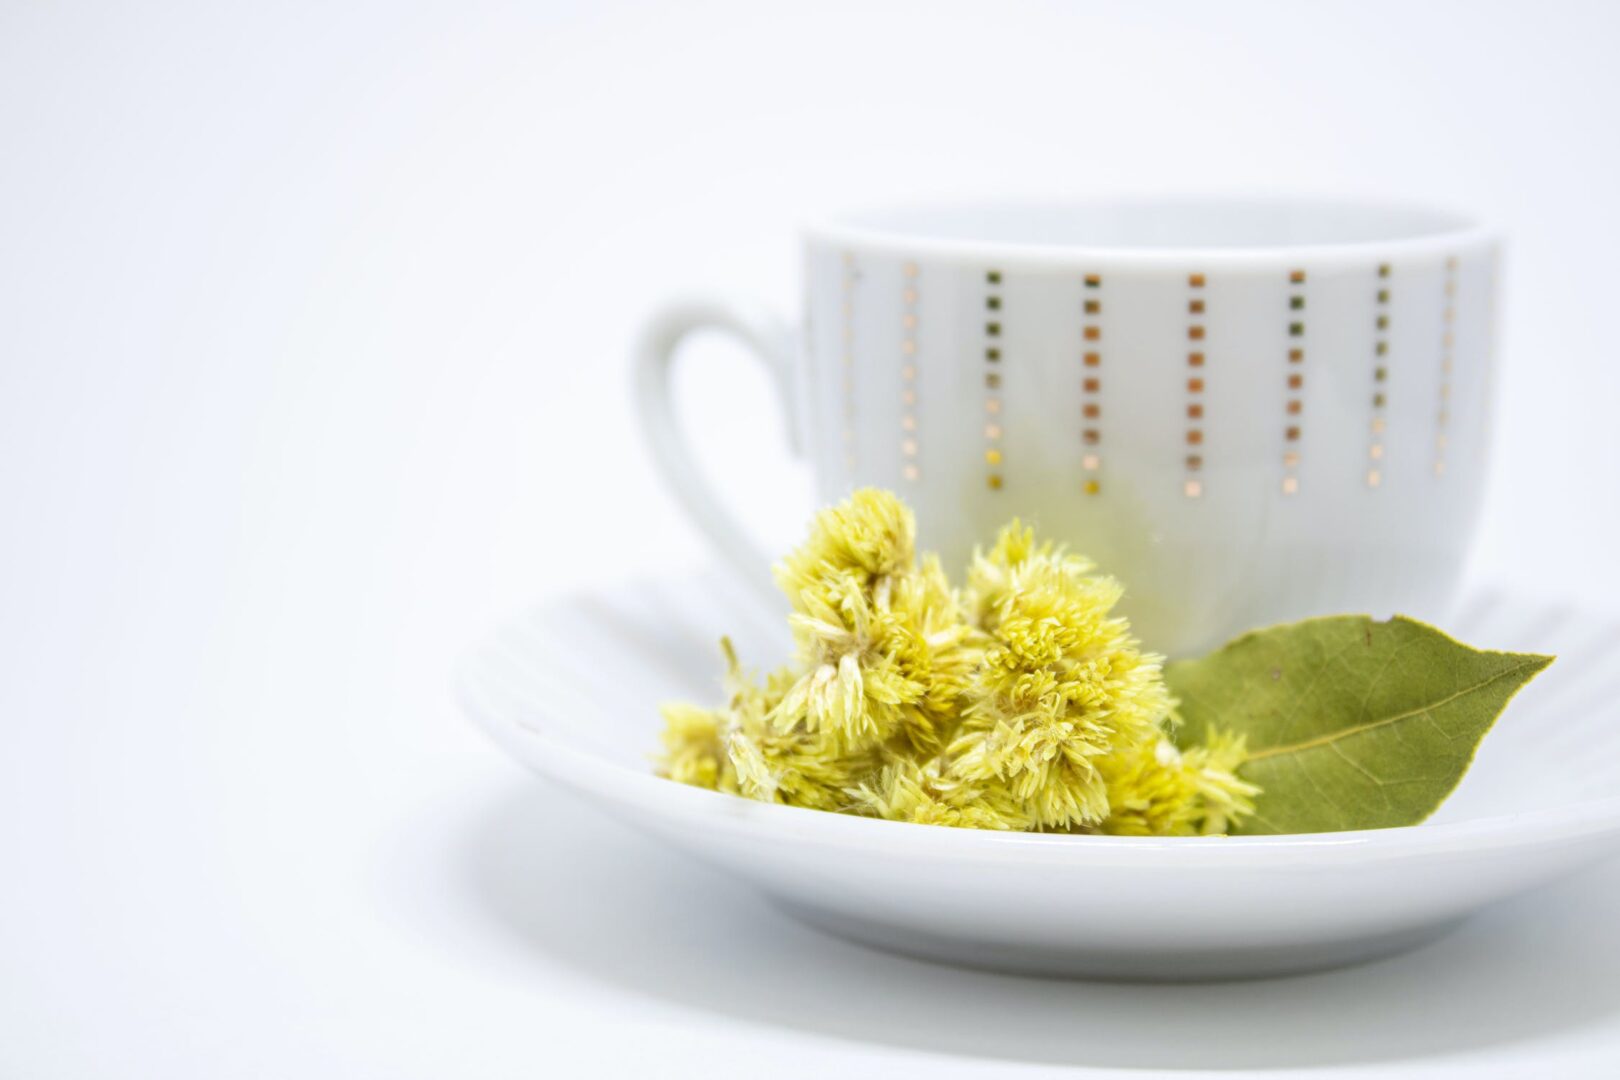 A white cup and saucer with yellow flowers on it.